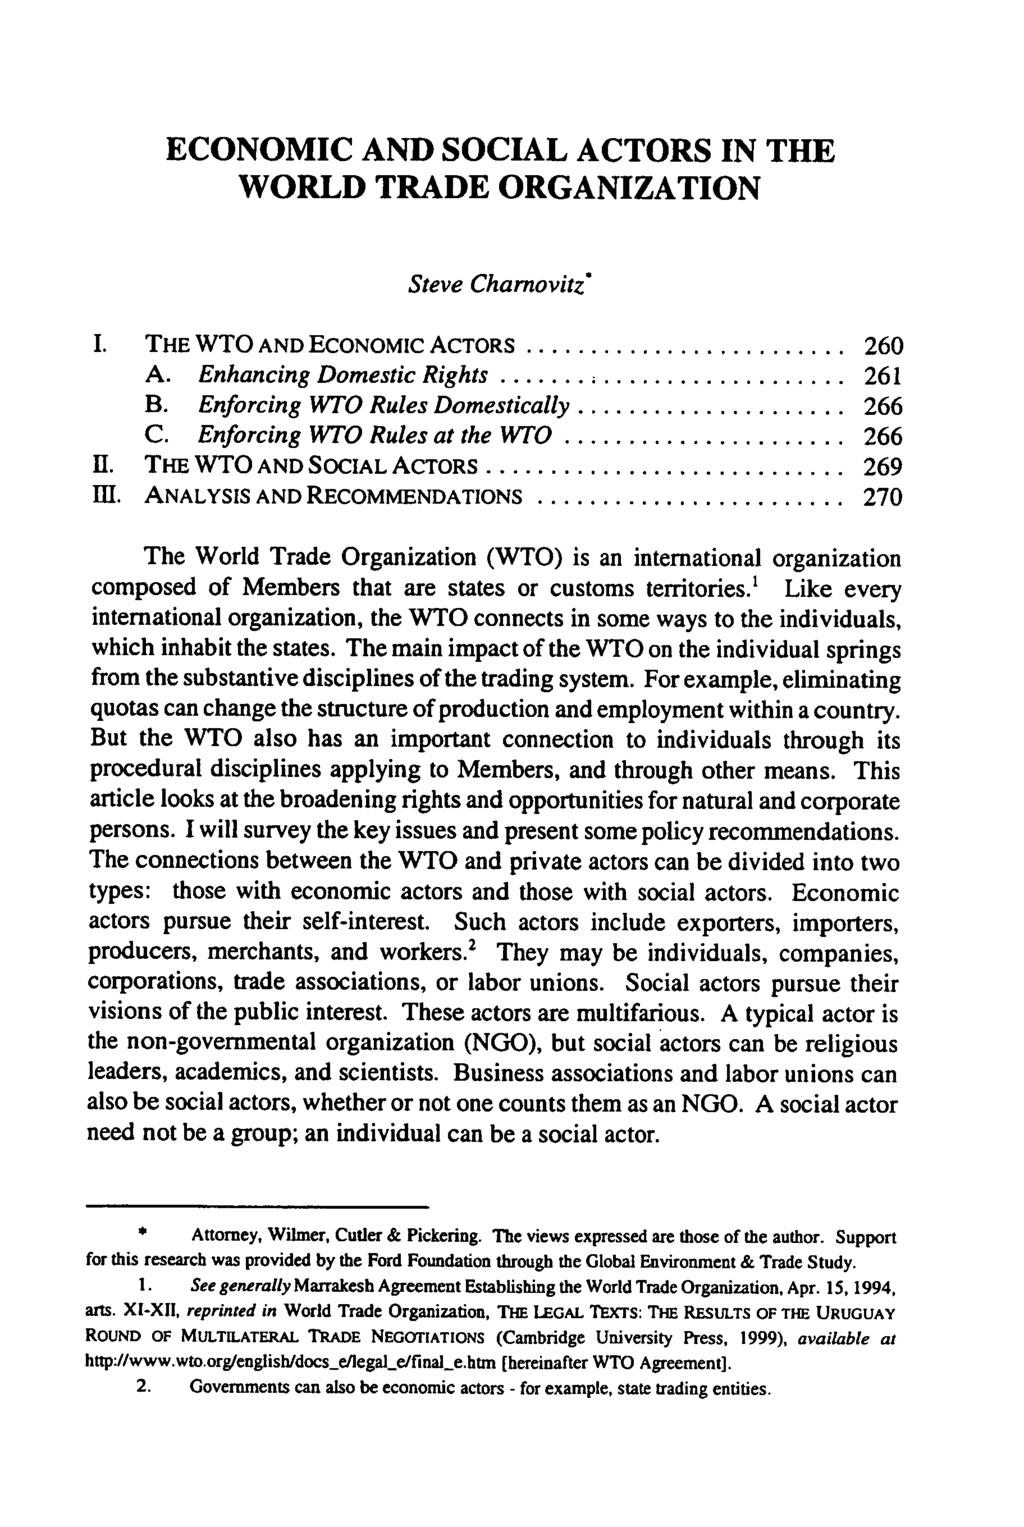 ECONOMIC AND SOCIAL ACTORS IN THE WORLD TRADE ORGANIZATION Steve Charnovitz" I. THE WTO AND ECONOMIC ACTORS... 260 A. Enhancing Domestic Rights... 261 B. Enforcing WTO Rules Domestically... 266 C.